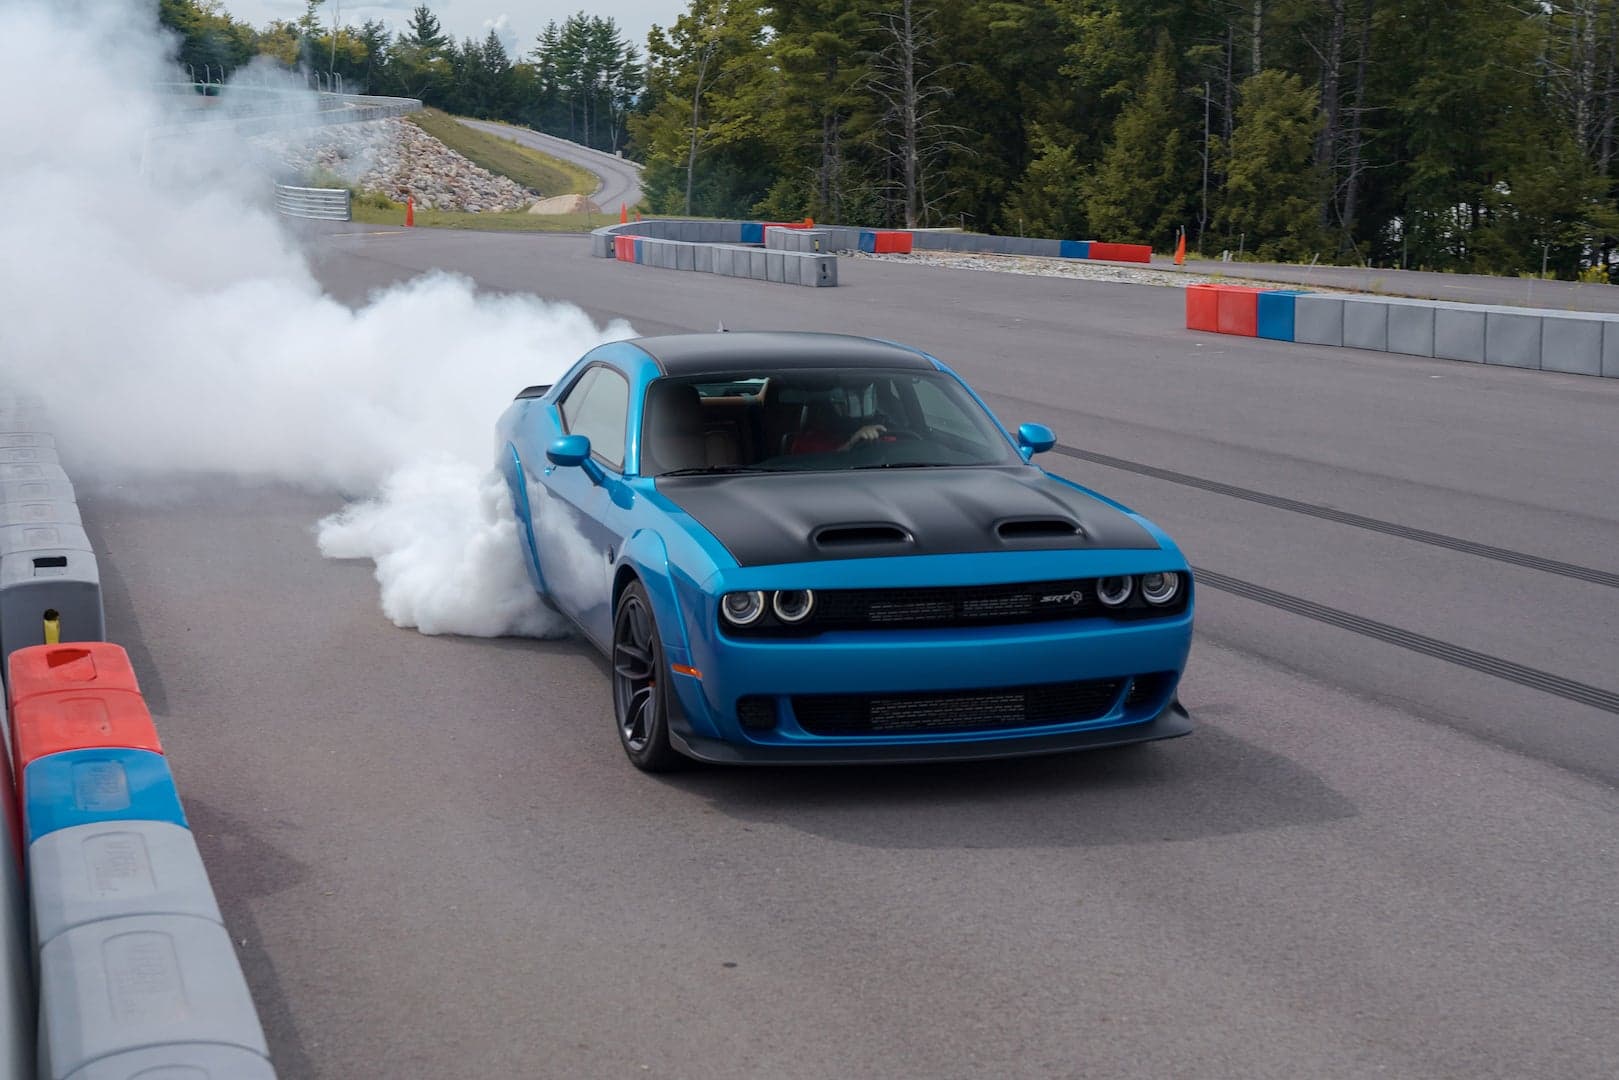 2019 Dodge Challenger First Drive: Meet the 797-HP Hellcat Redeye and the Hot-Handling Scat Pack Widebody